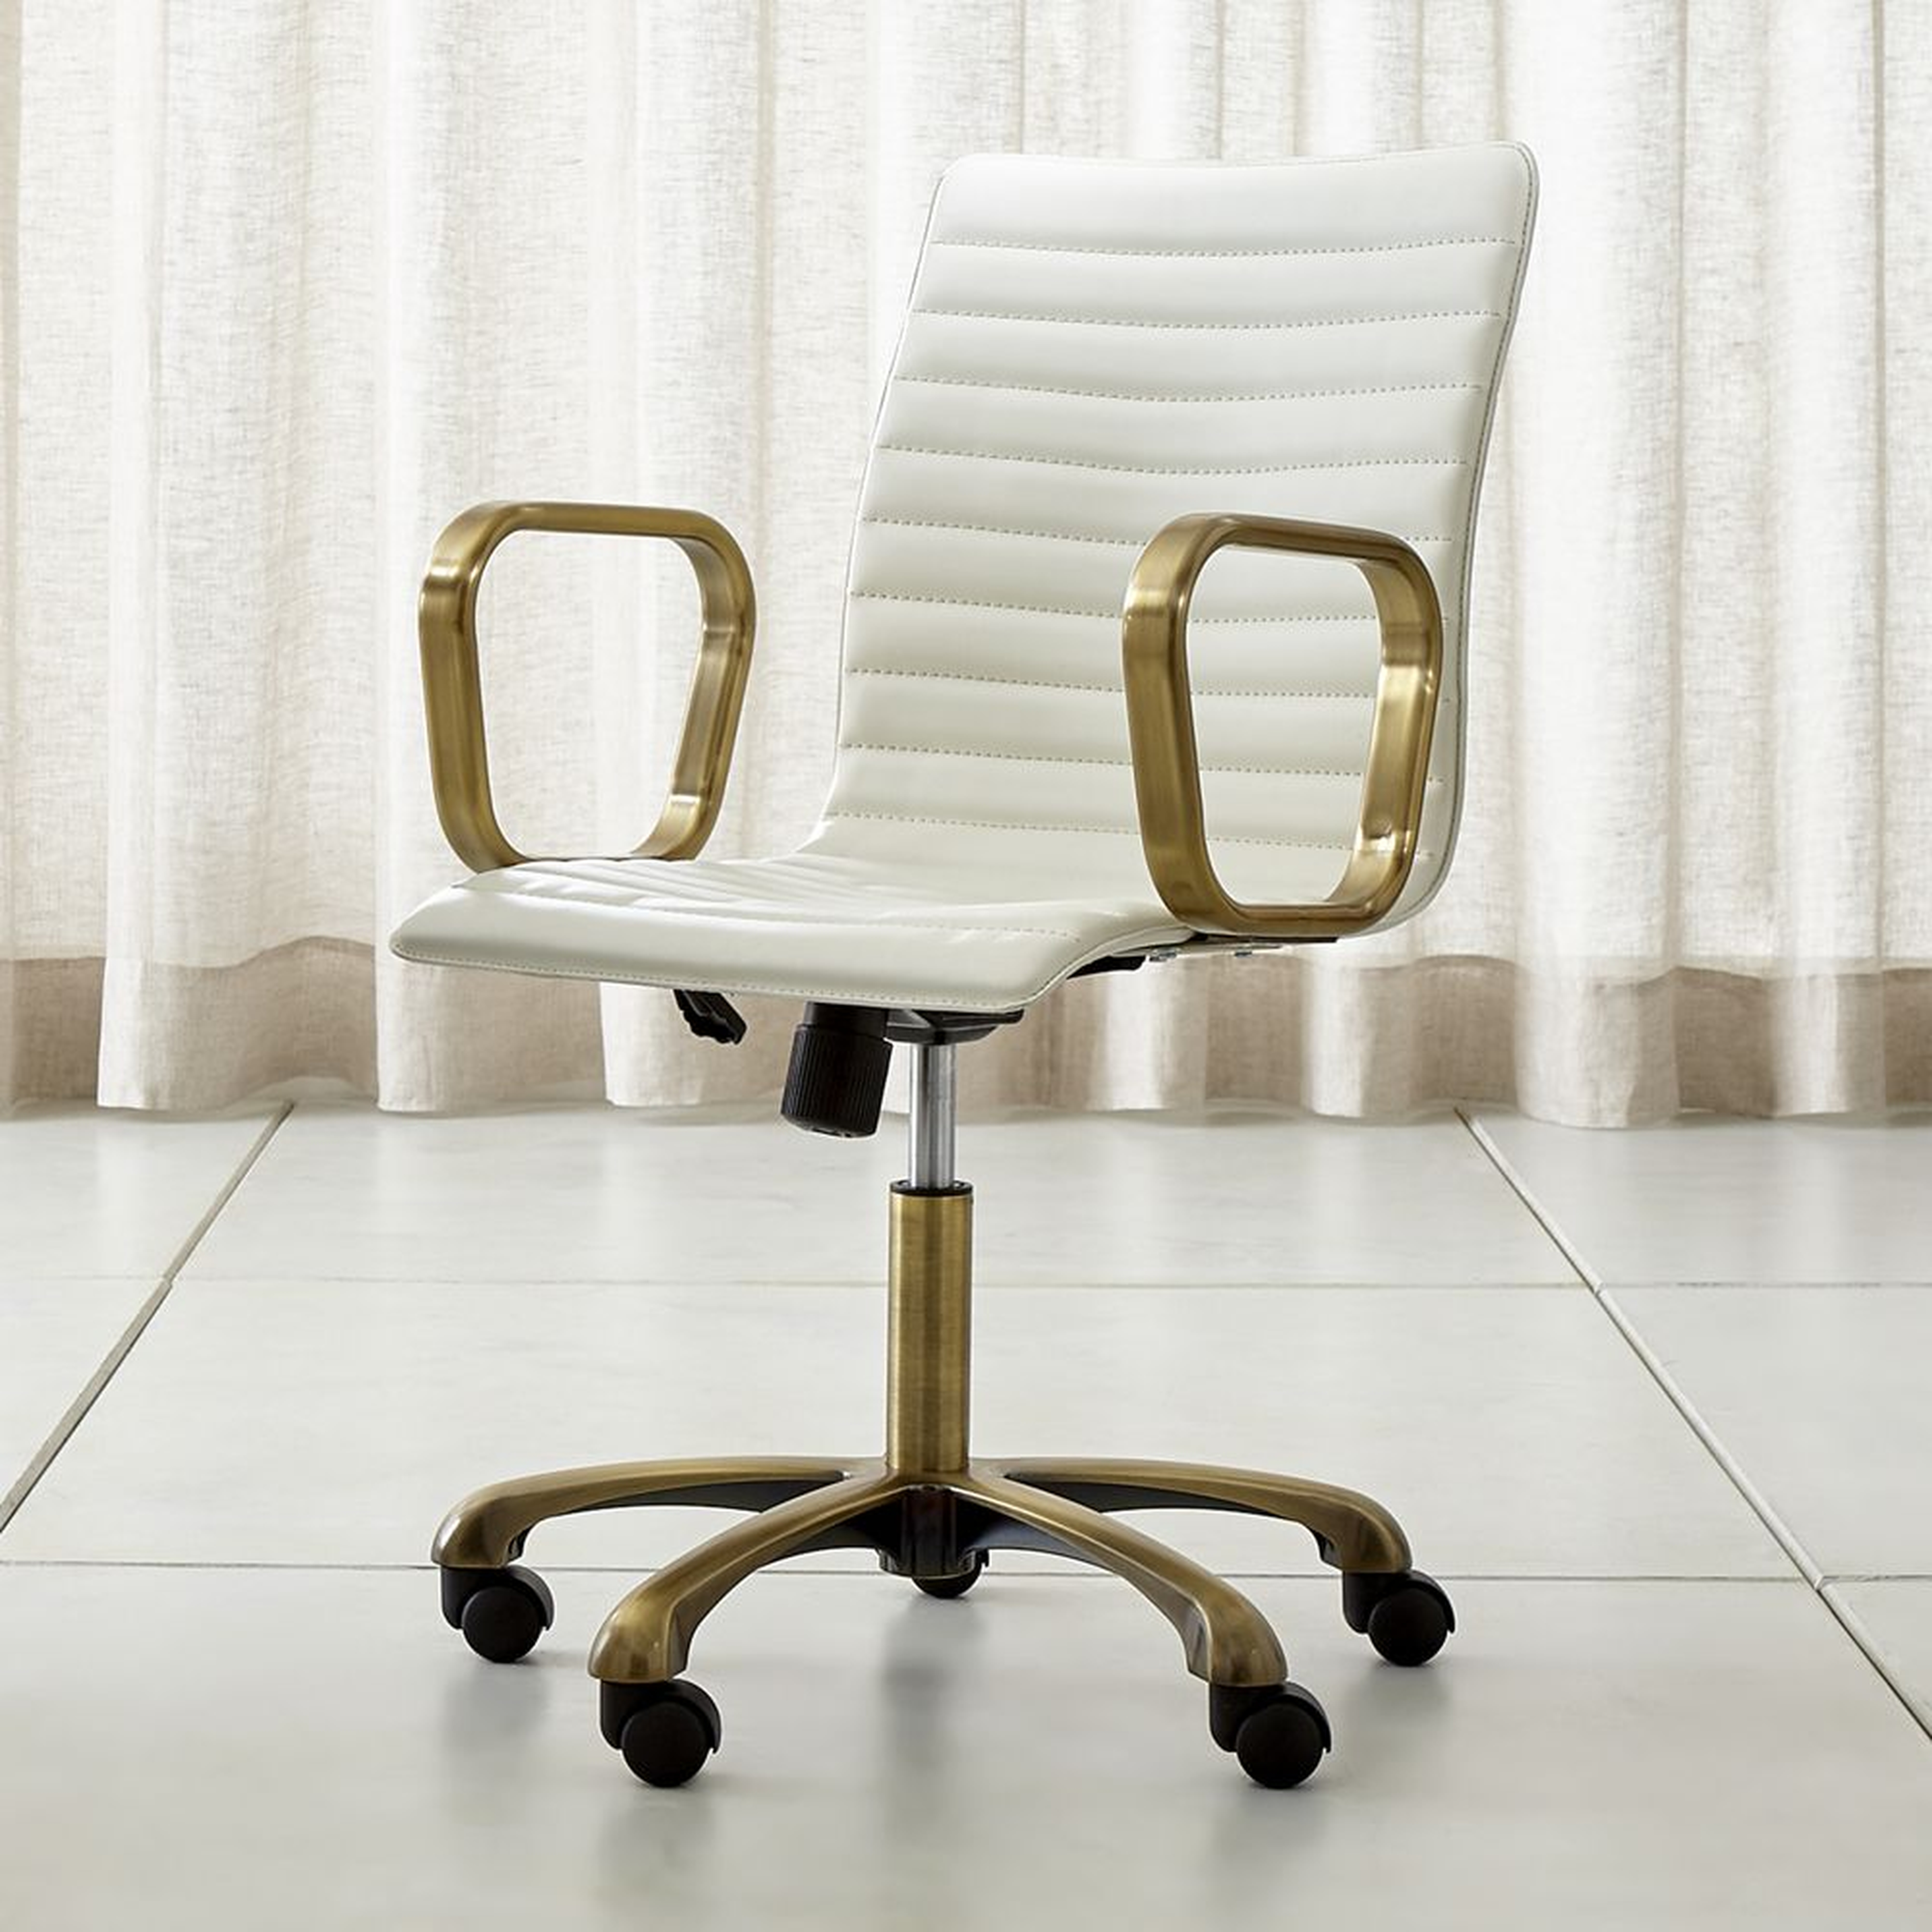 Ripple Ivory Leather Office Chair with Brass Frame - Crate and Barrel